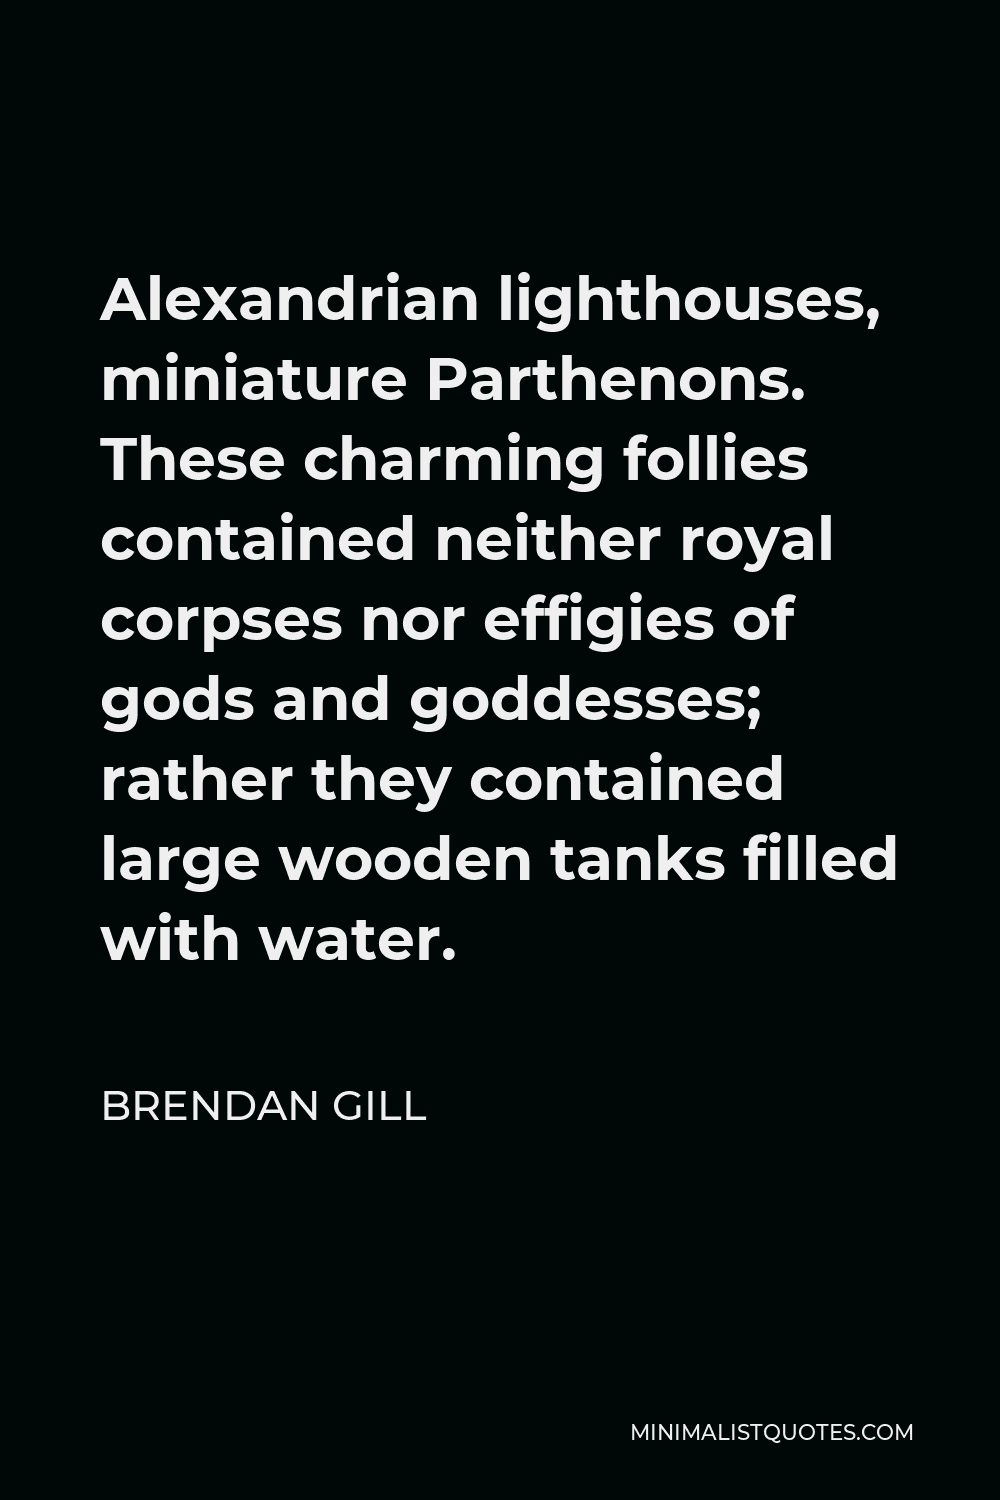 Brendan Gill Quote - Alexandrian lighthouses, miniature Parthenons. These charming follies contained neither royal corpses nor effigies of gods and goddesses; rather they contained large wooden tanks filled with water.